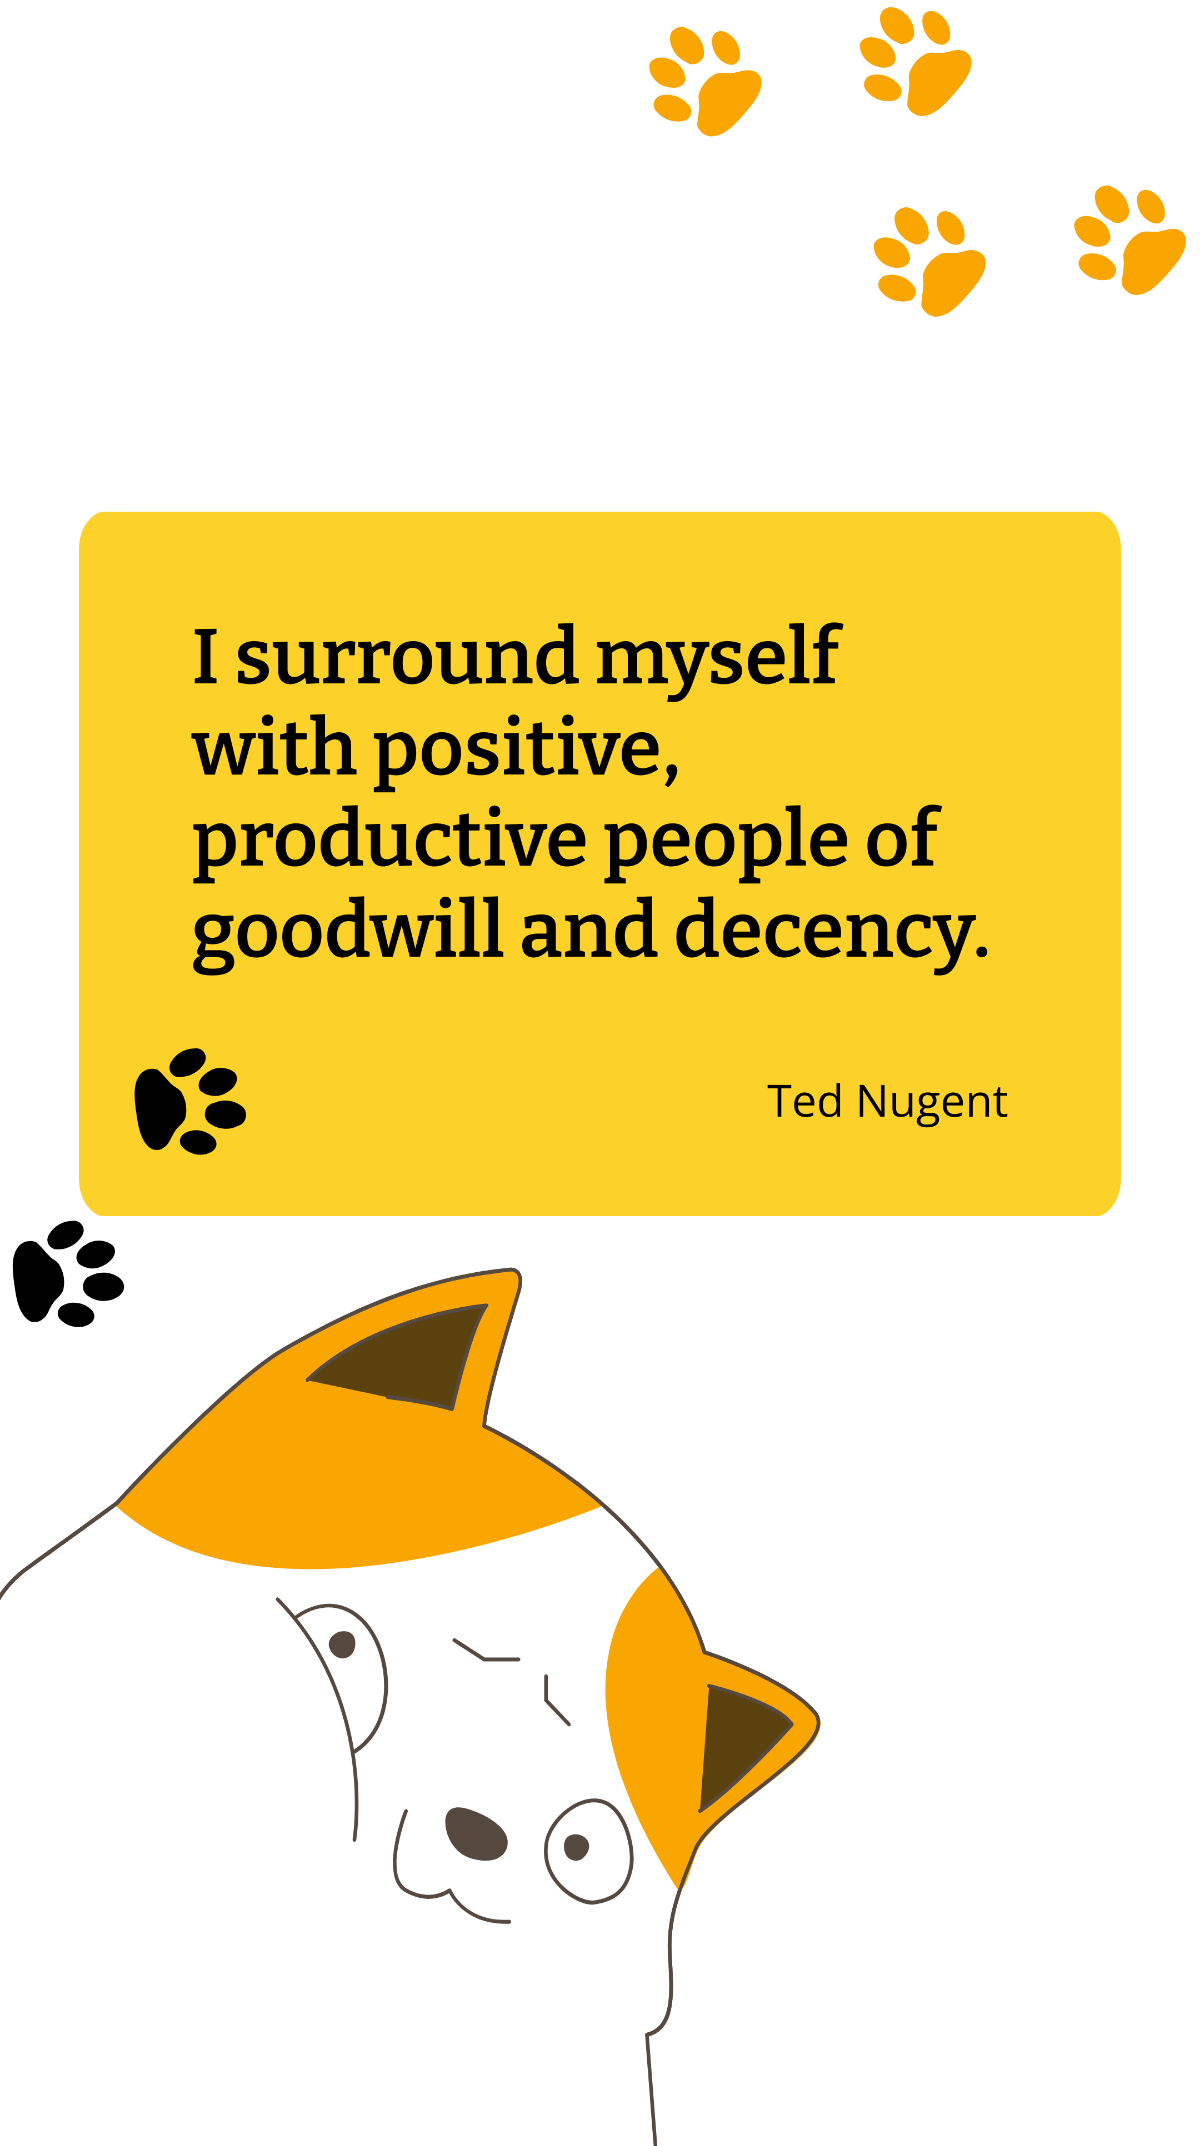 Ted Nugent - I surround myself with positive, productive people of goodwill and decency. Template